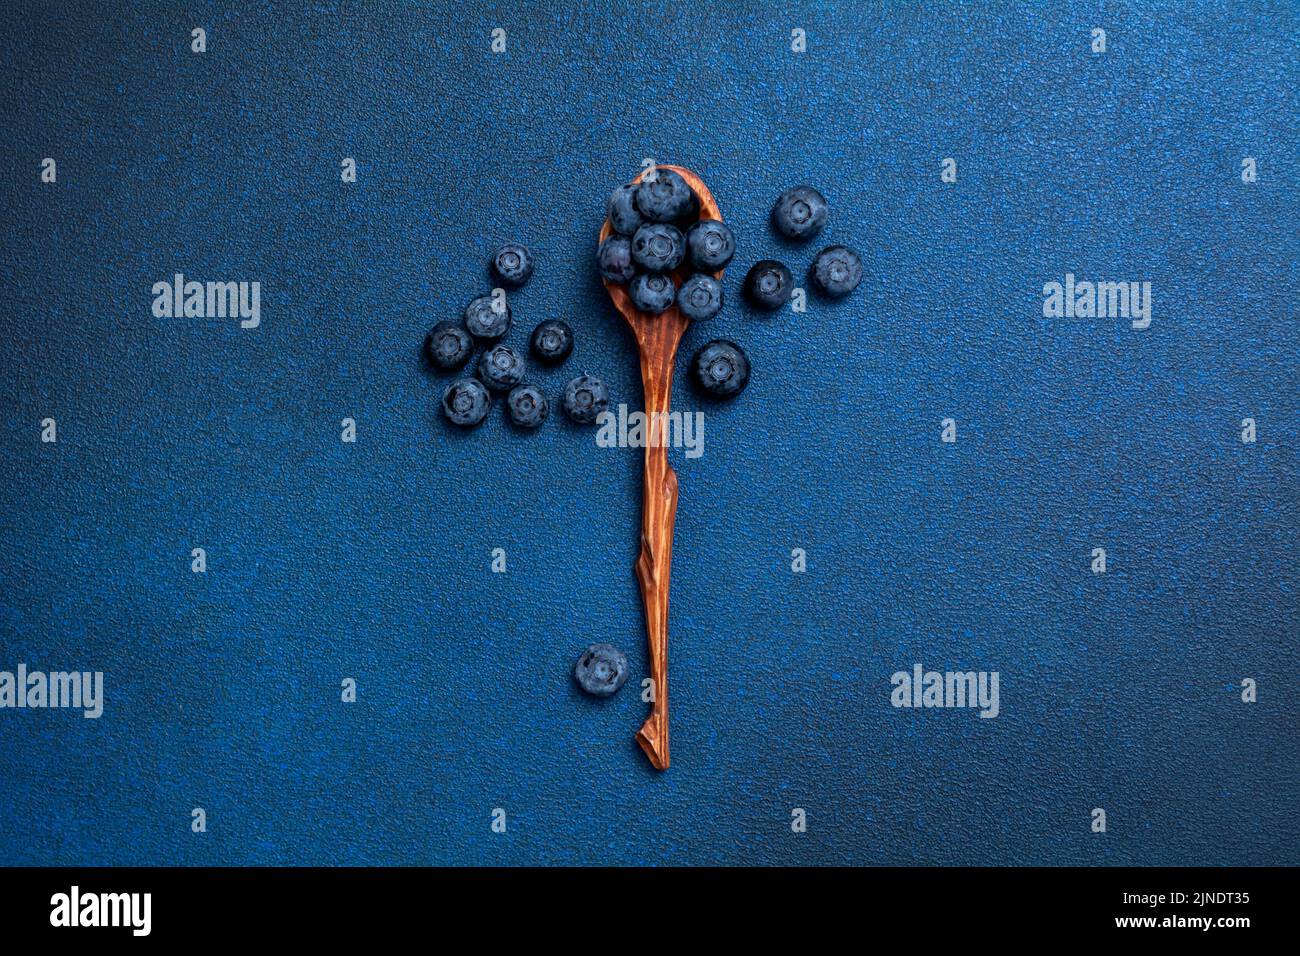 Fresh blueberries in a wooden spoon. Berries on a blue background. View from above. Stock Photo